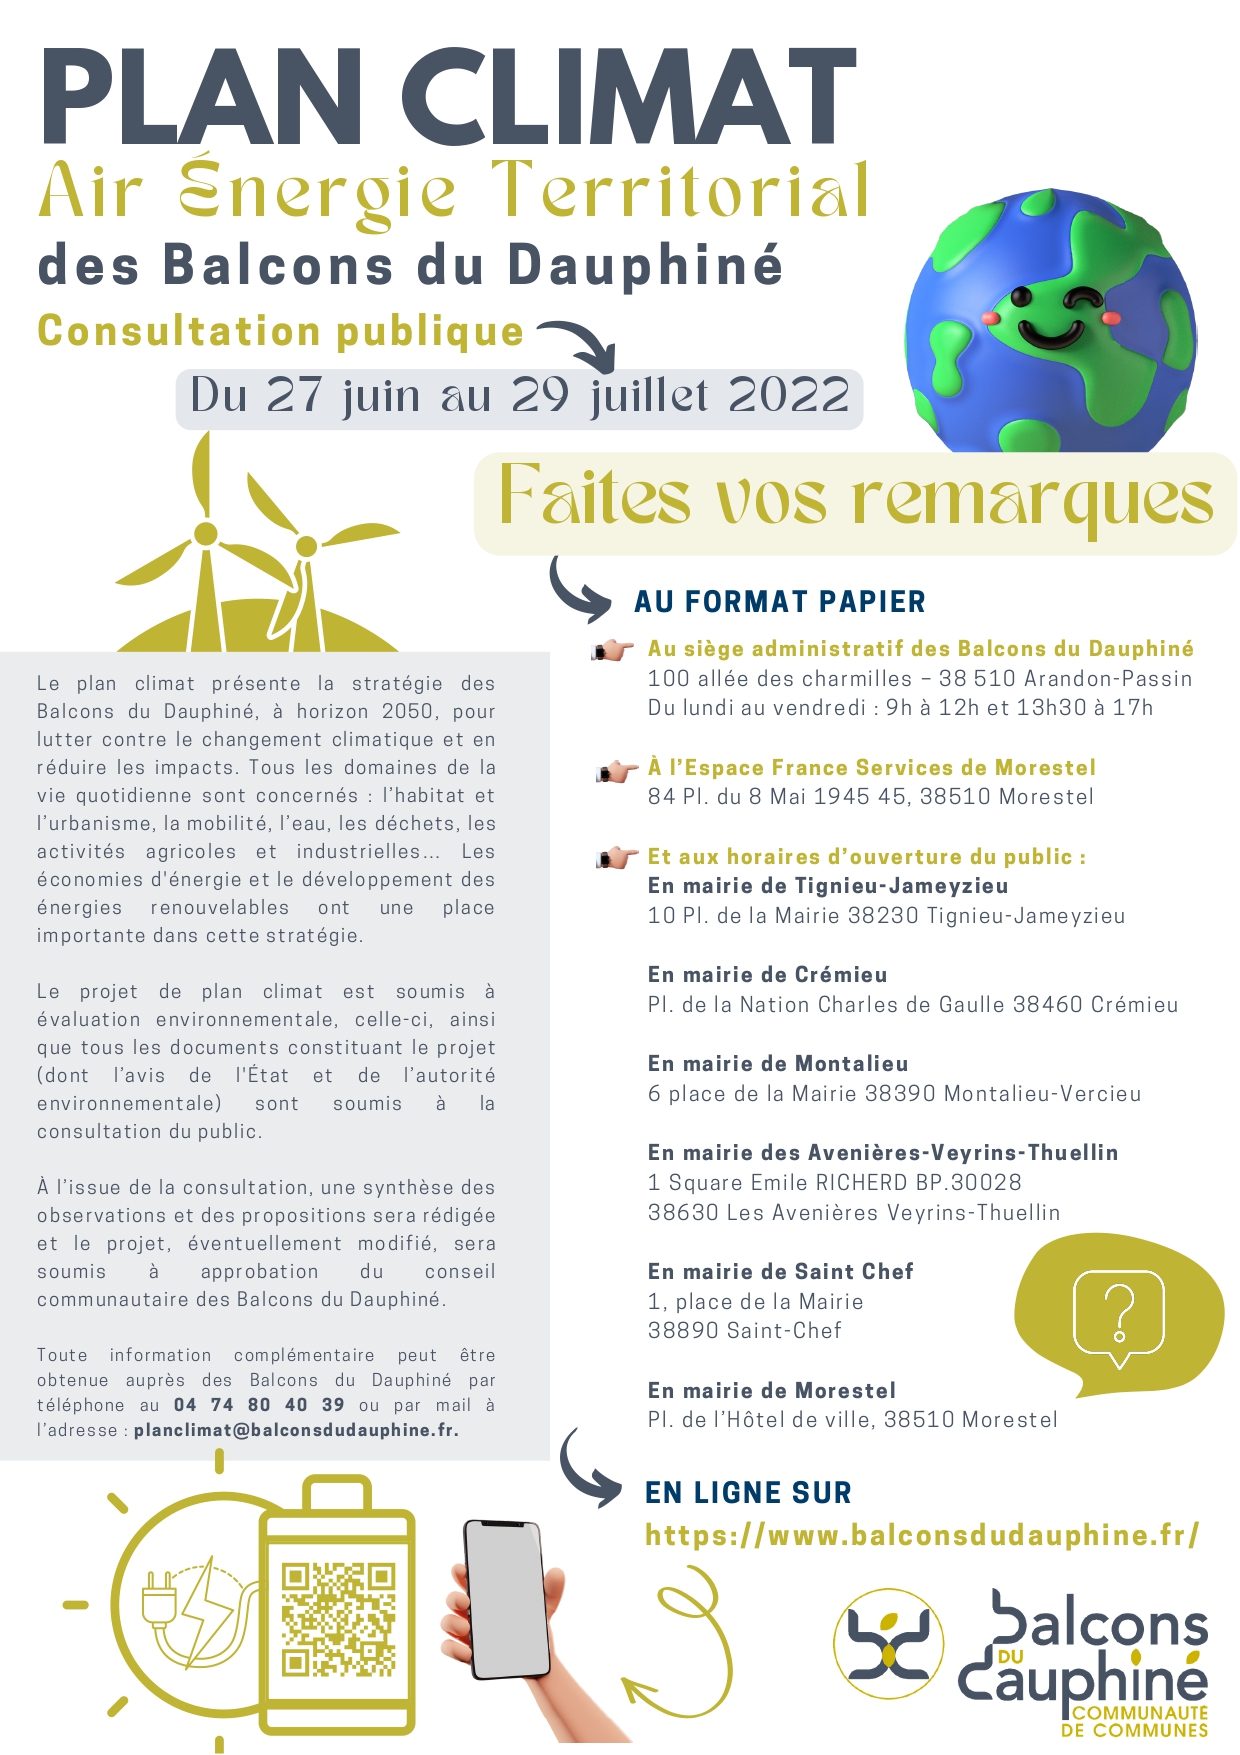 Affiche_plan climat_pages-to-jpg-0001.jpg